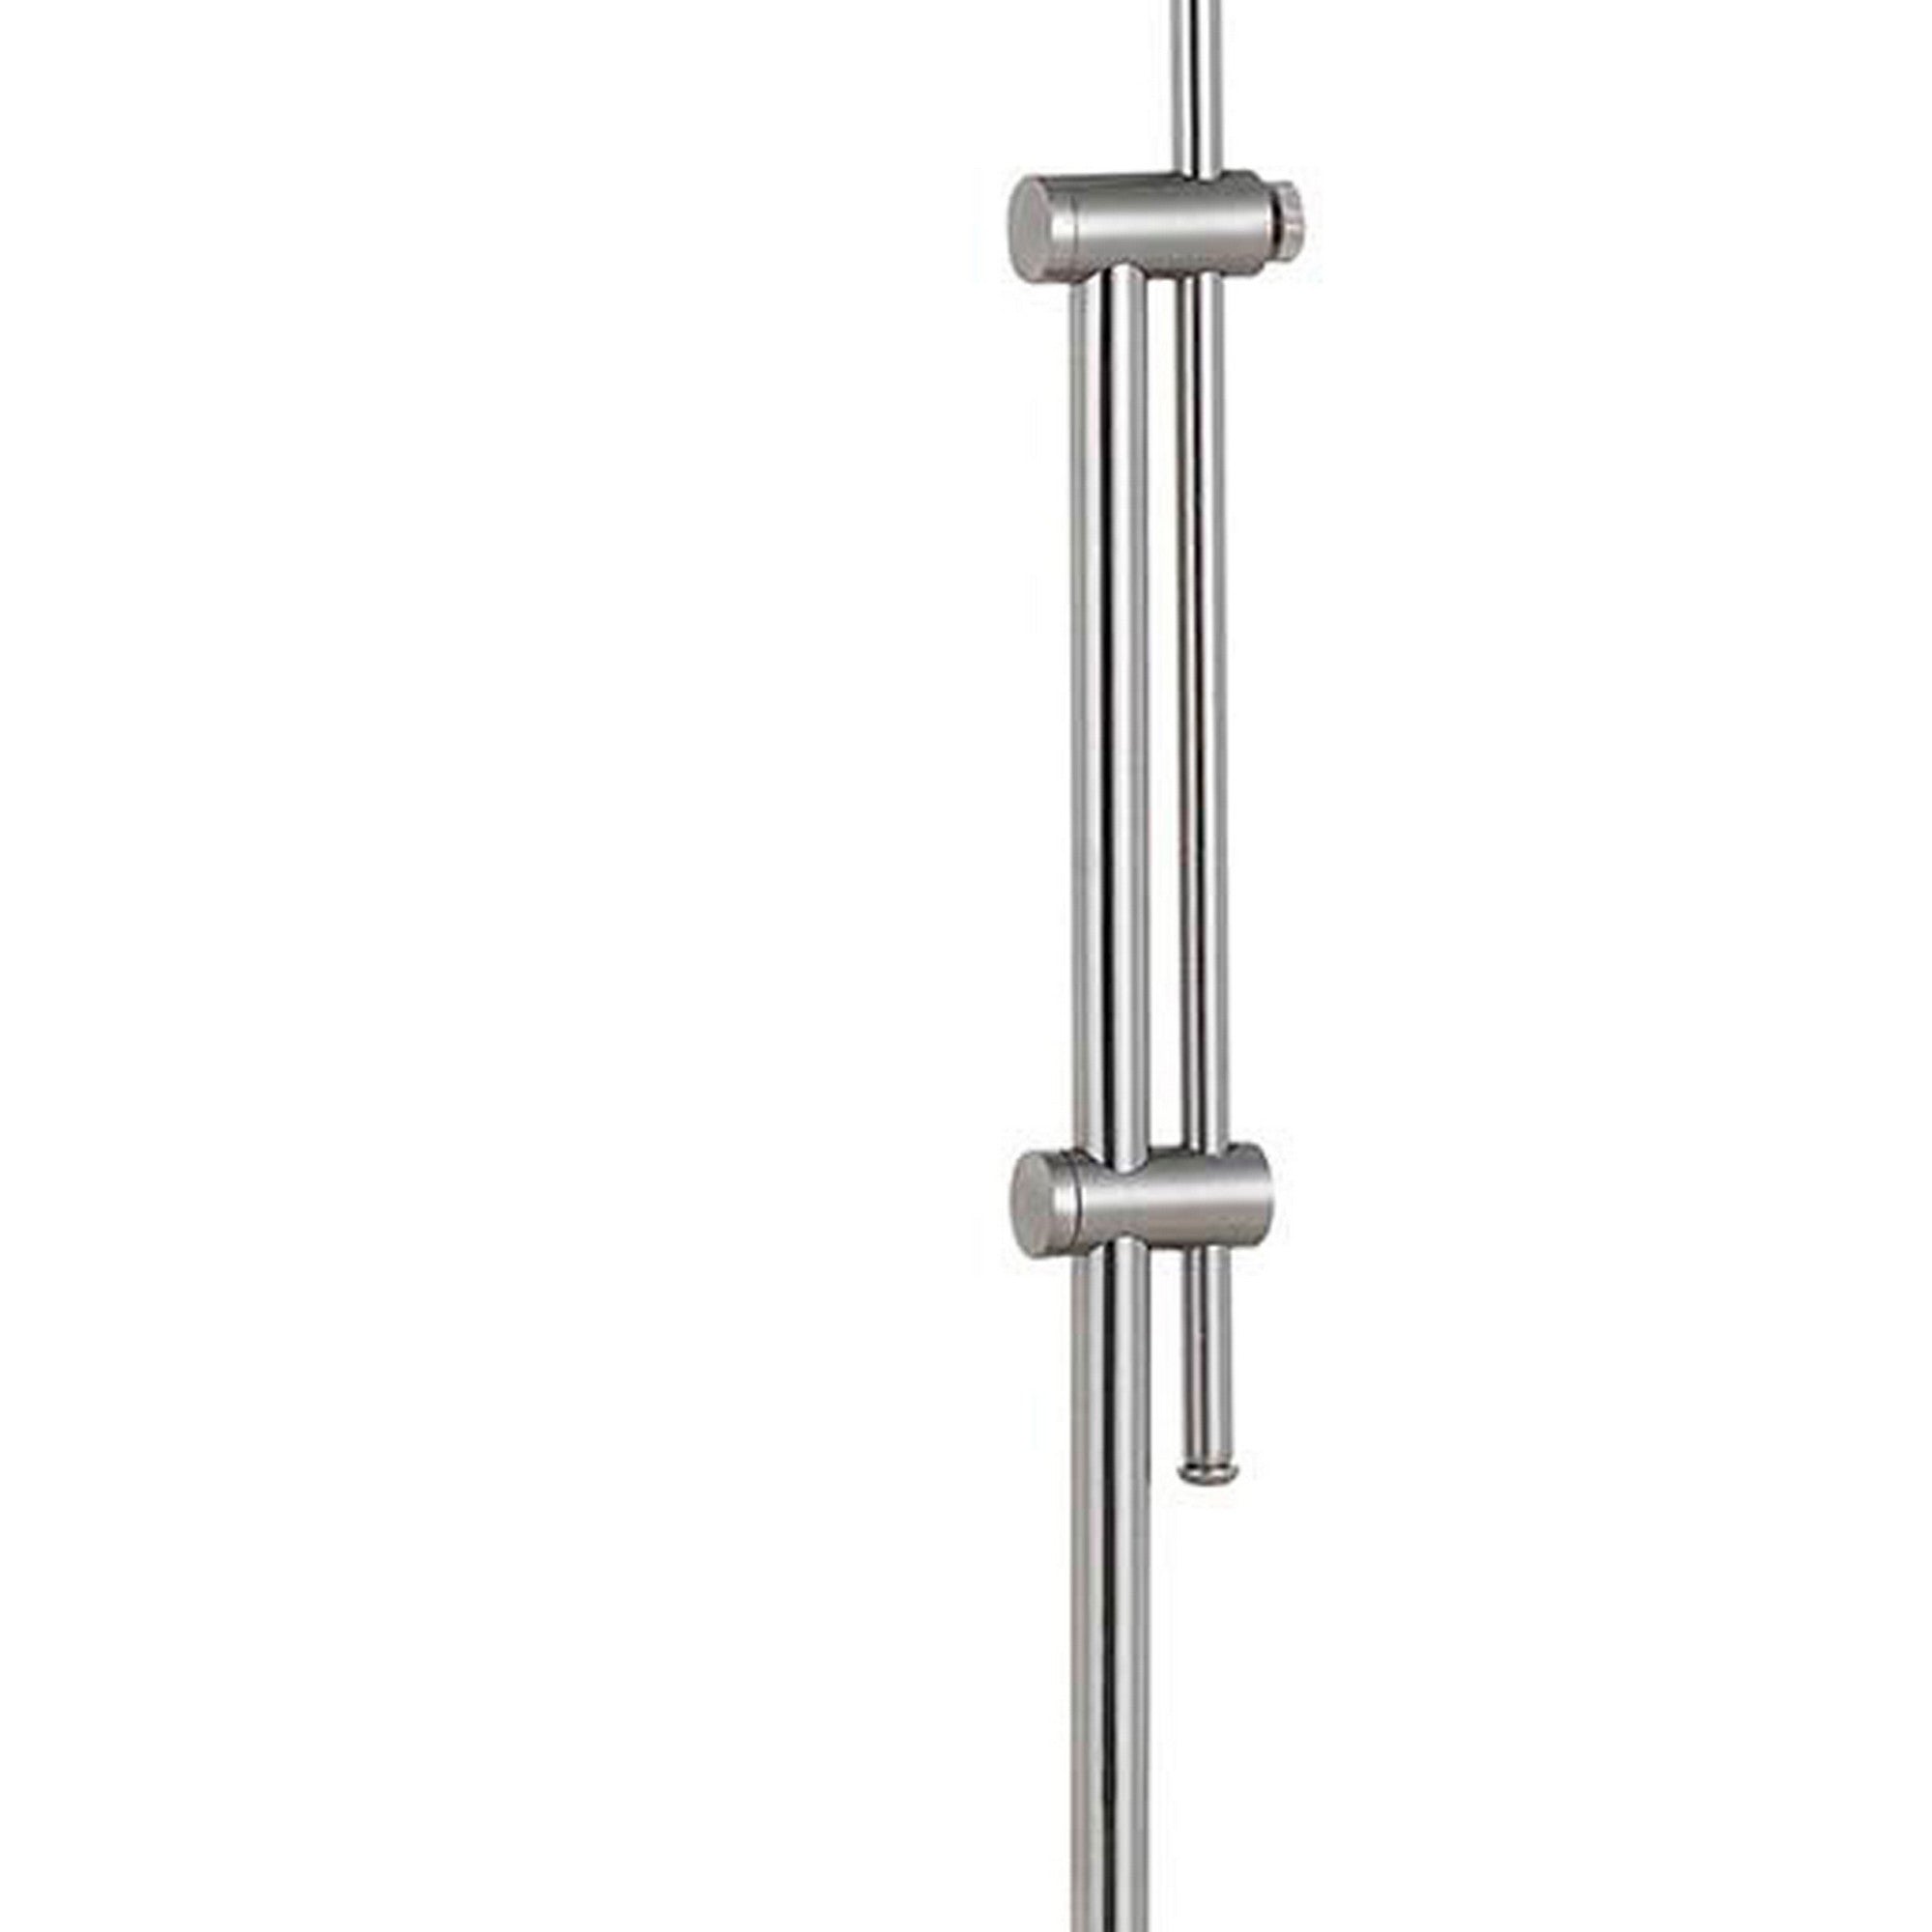 Adjustable Height Metal Pharmacy Lamp With Pull Chain Switch, Silver By Benzara